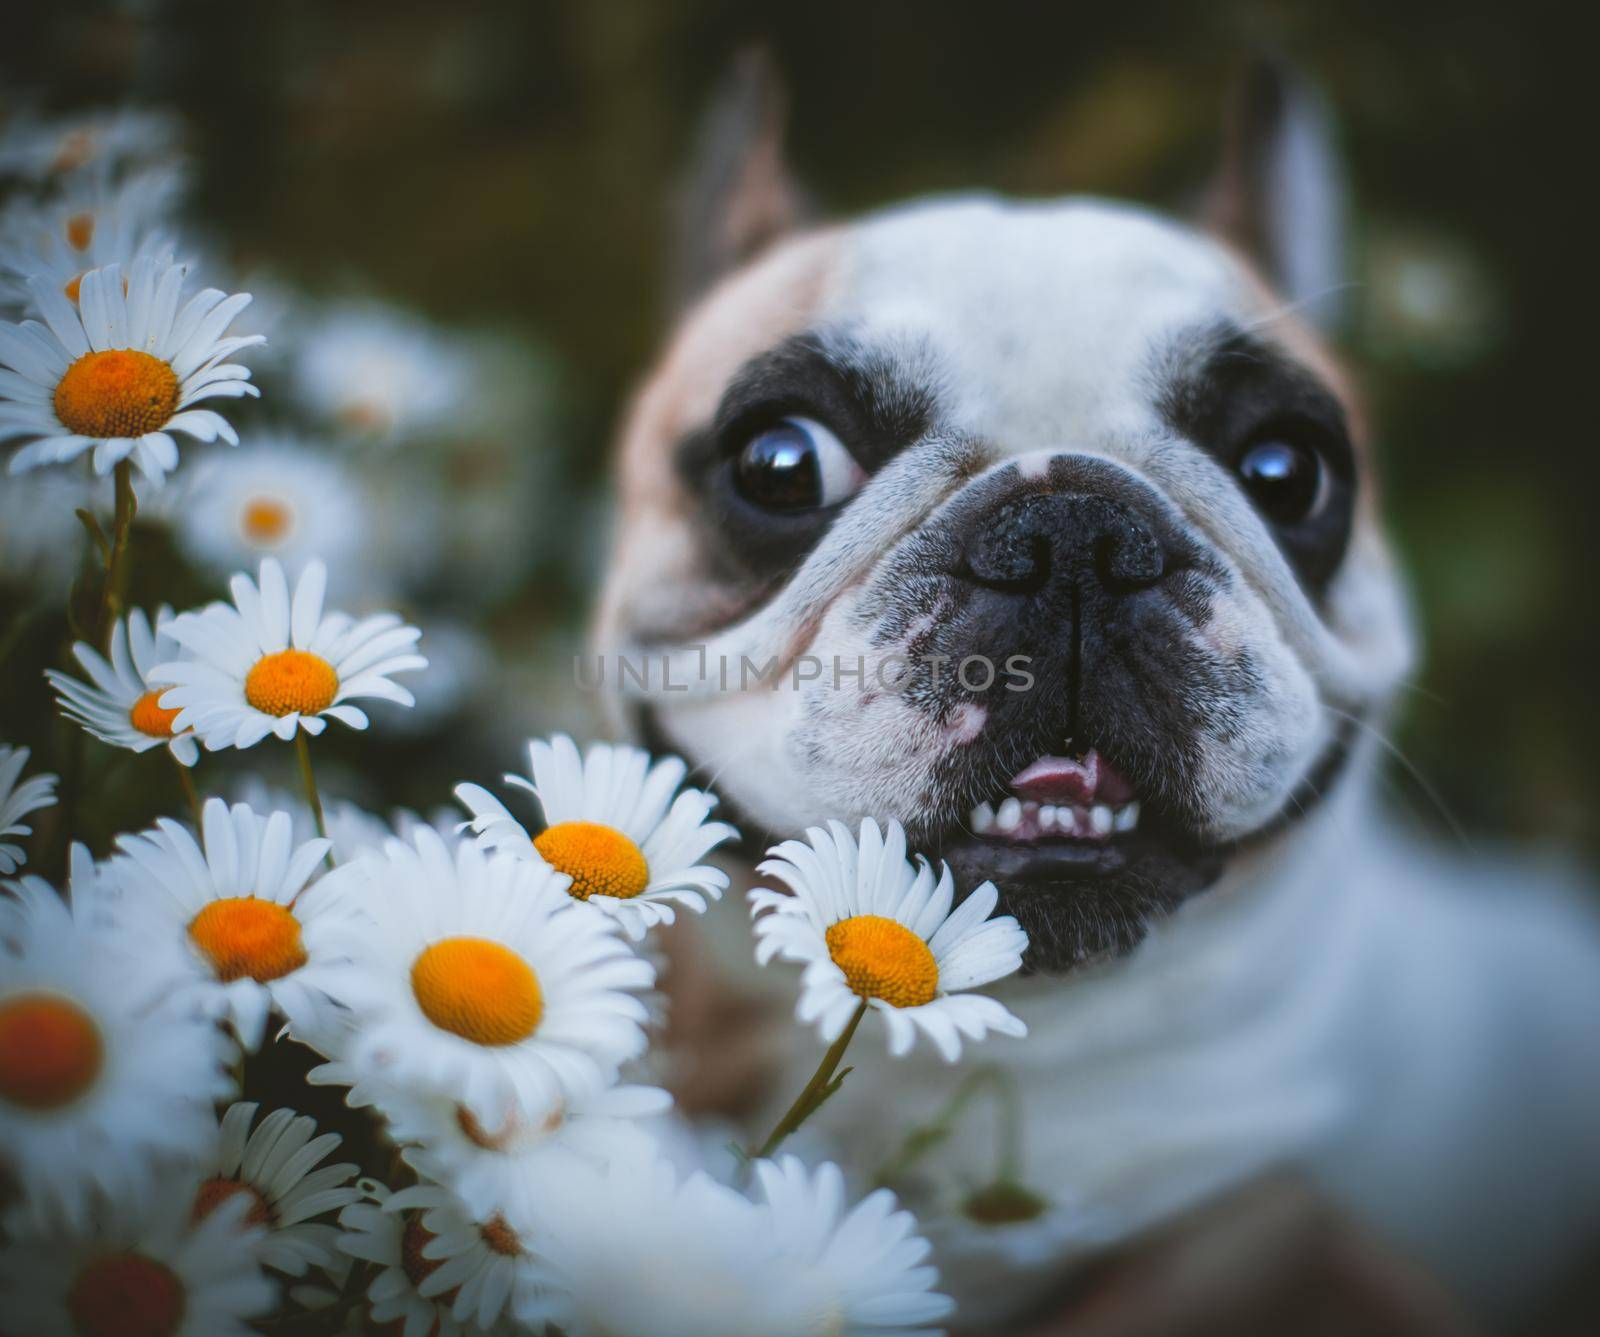 Amazing white French bulldog with spots sits in a meadow surrounded by white chamomile flowers